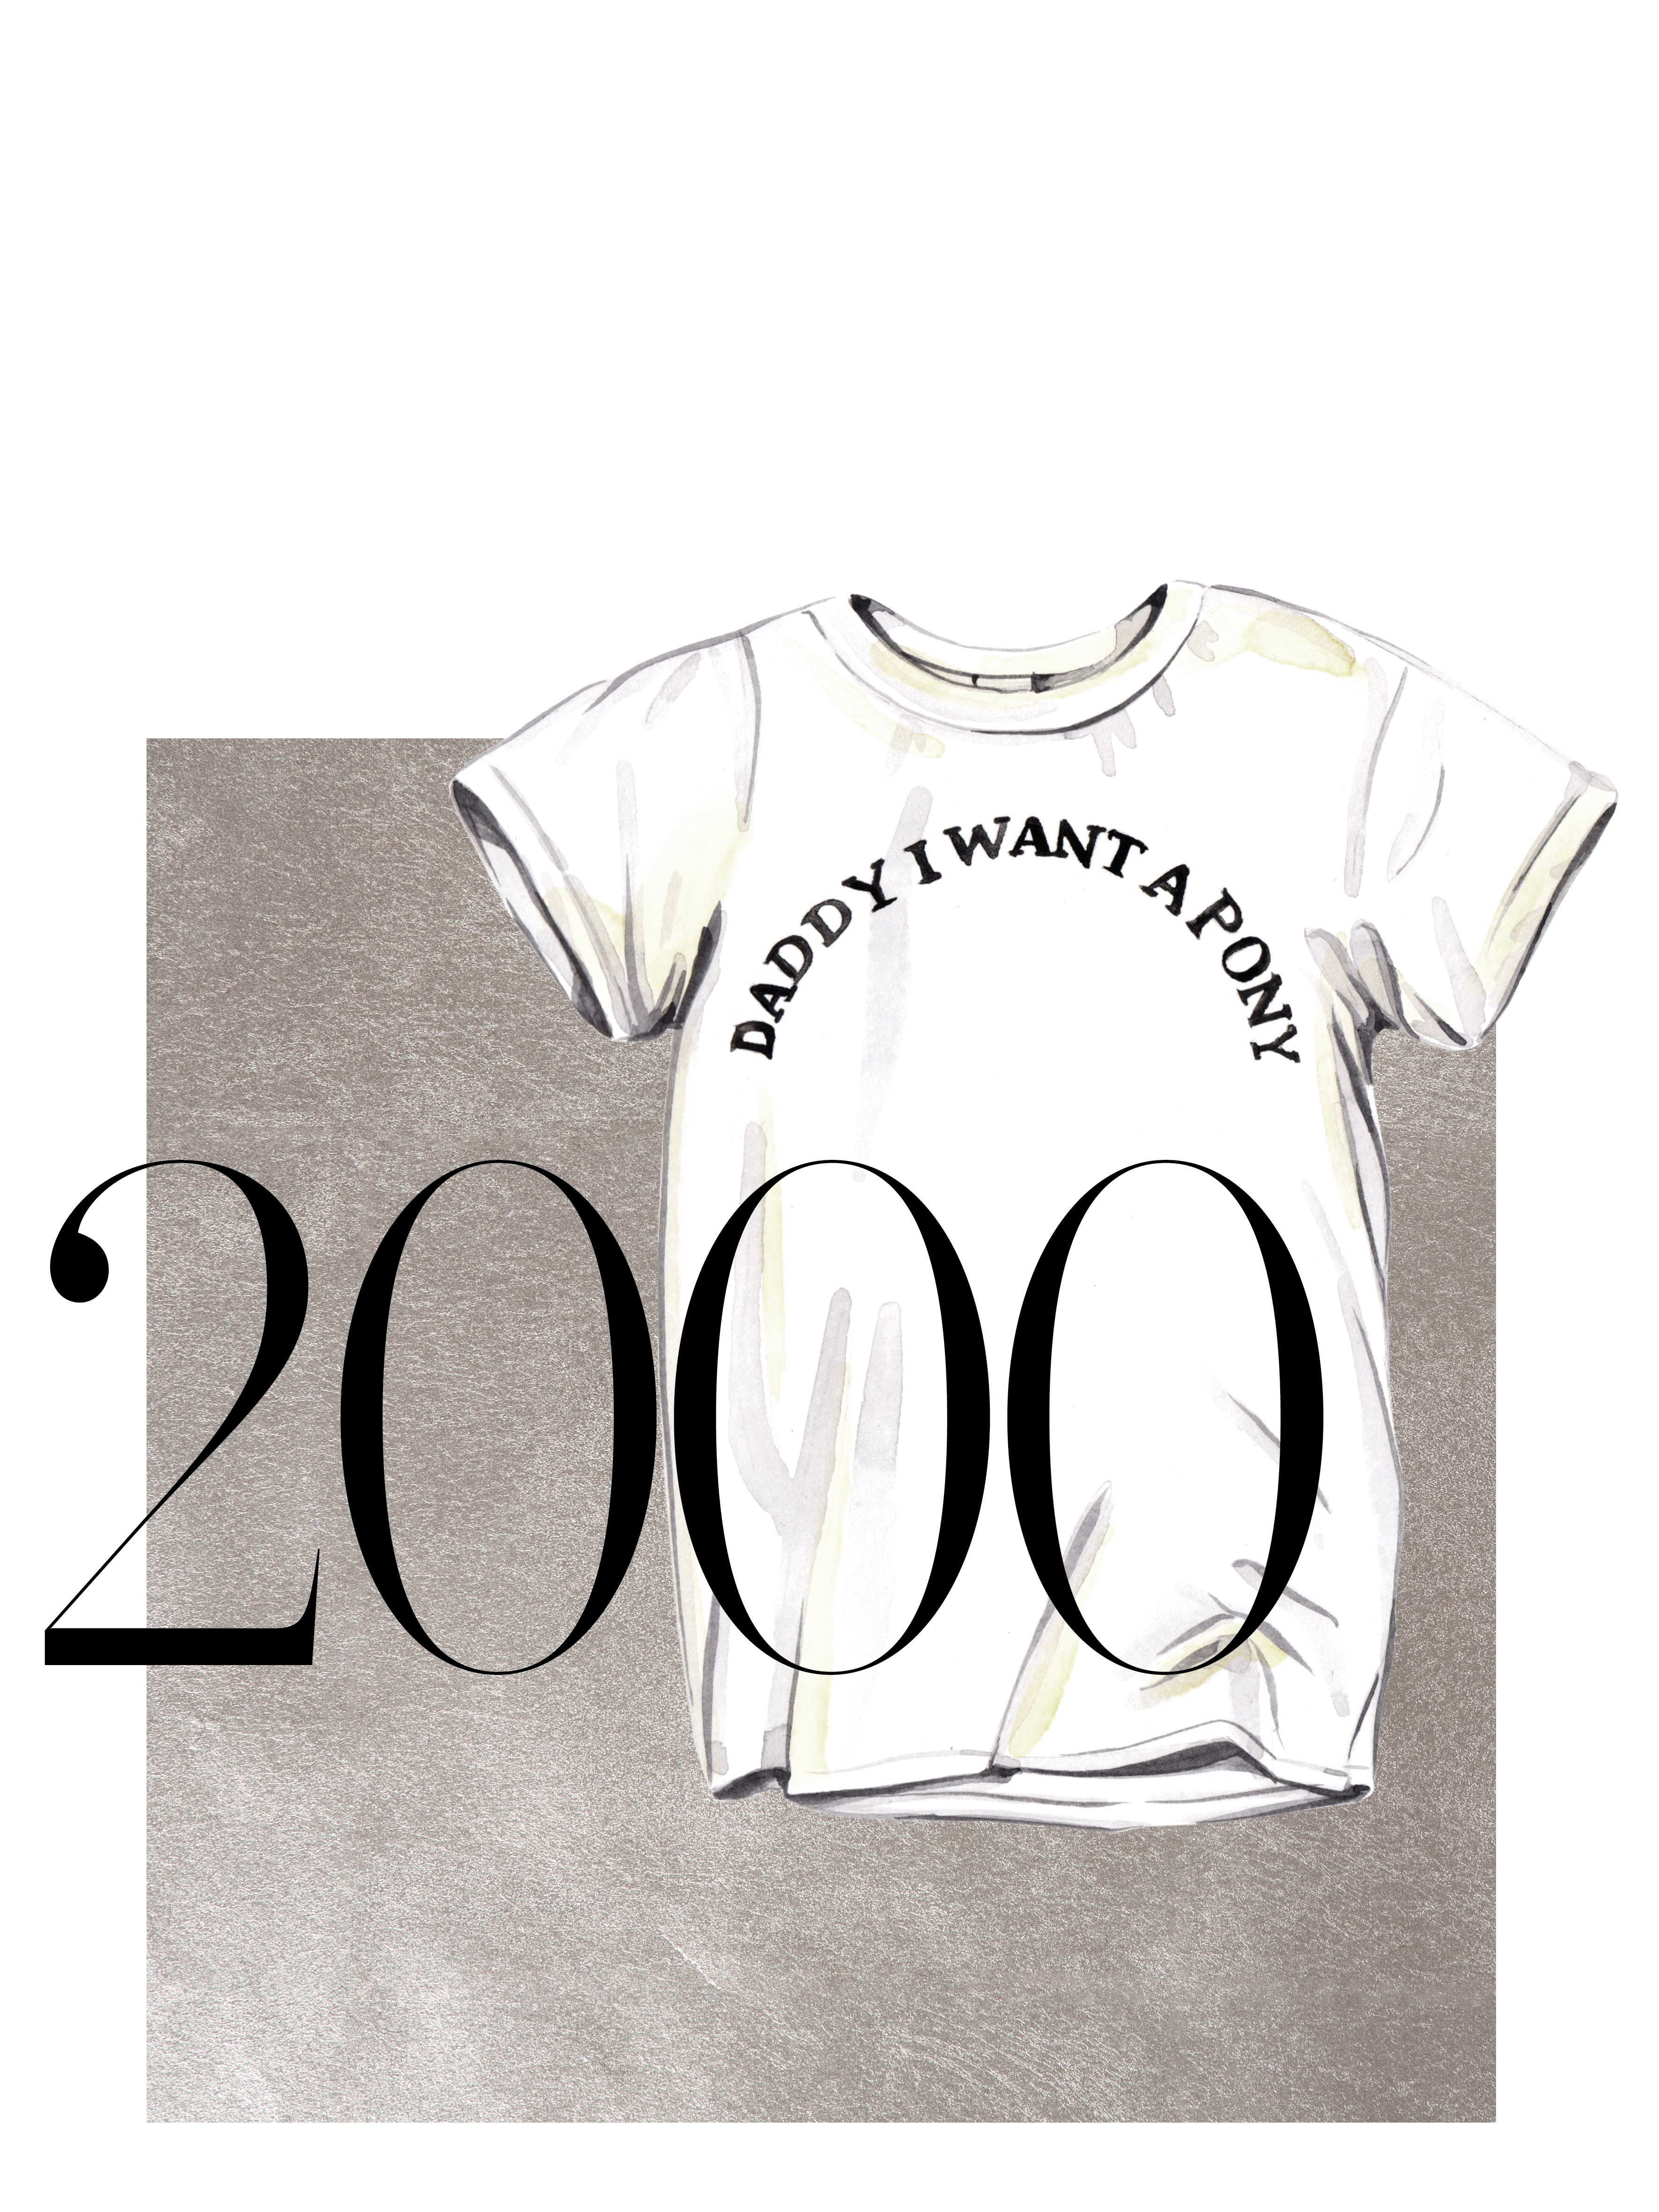 A timeline of NET-A-PORTER’s bestsellers and most-wanted pieces since 2000